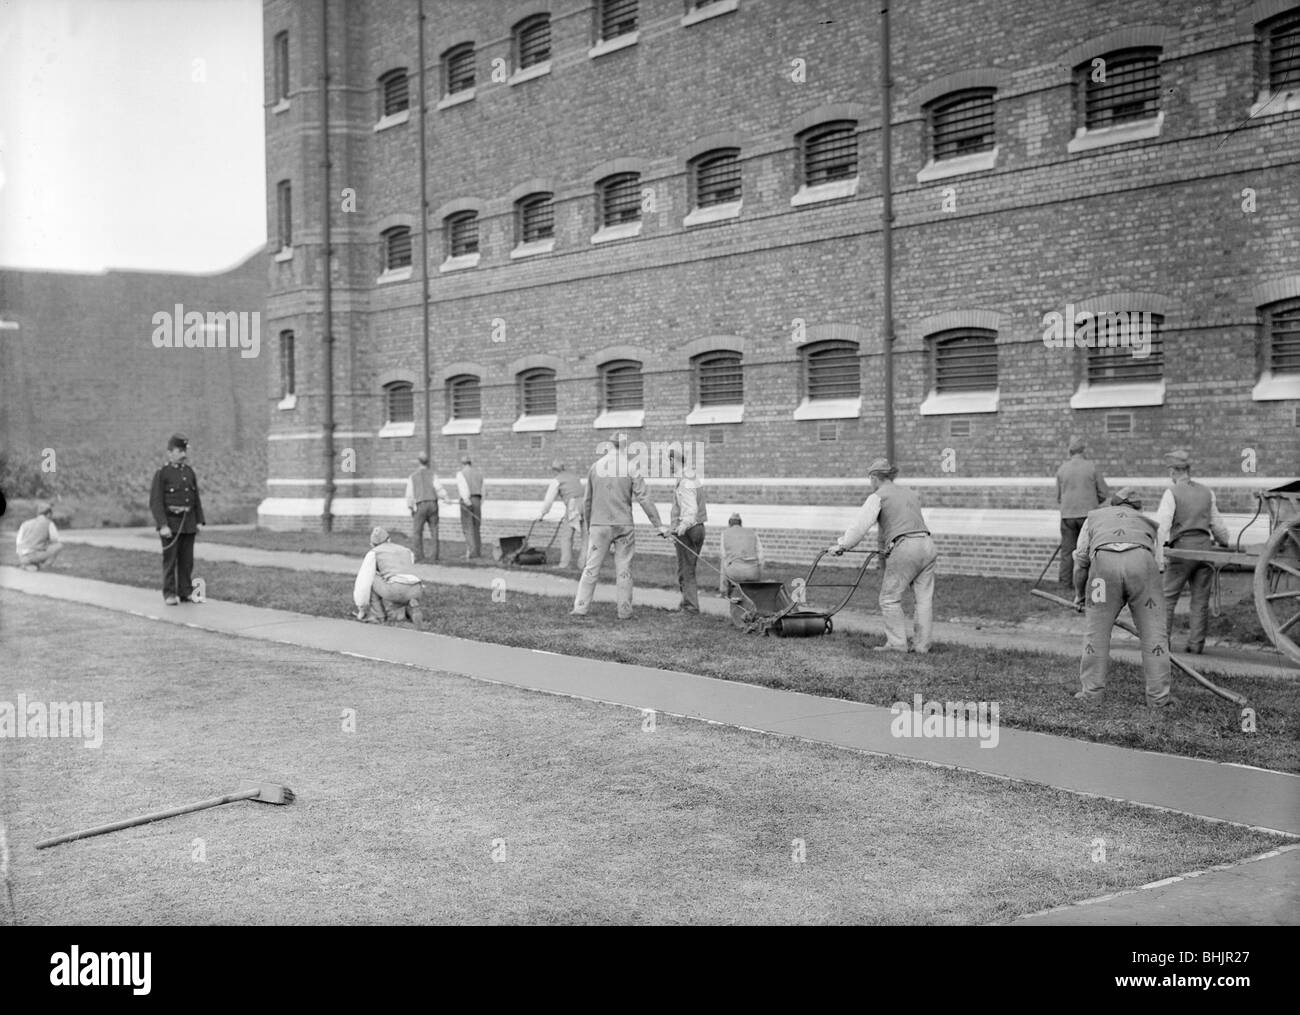 Wormwood scrubs prison london Black and White Stock Photos & Images - Alamy